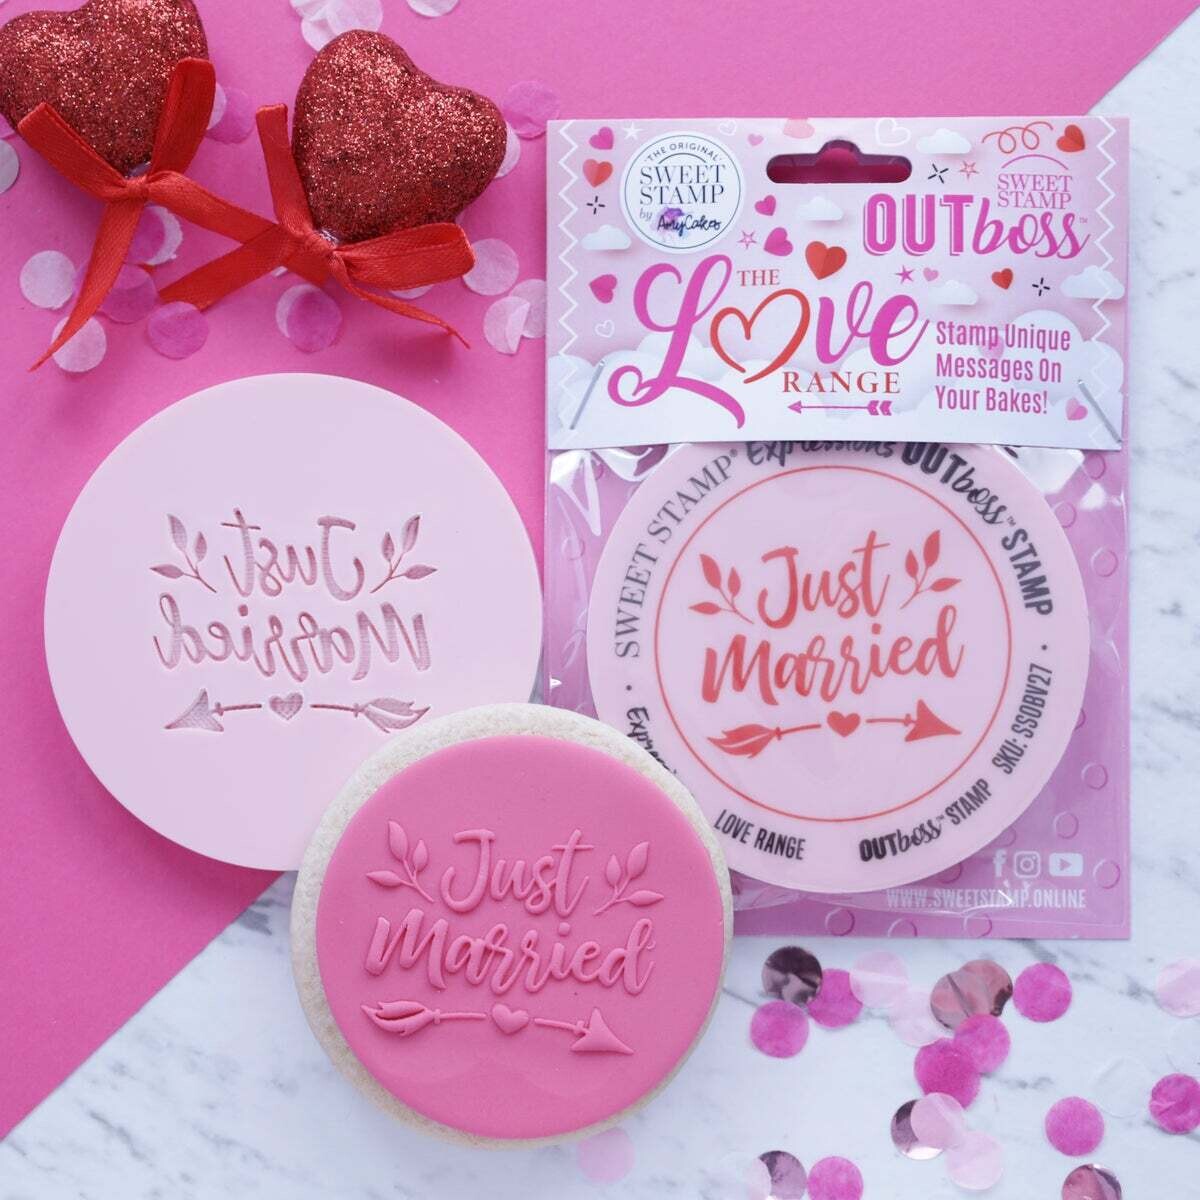 Sweet Stamp -OUTboss Expressions -JUST MARRIED - Σφραγίδα